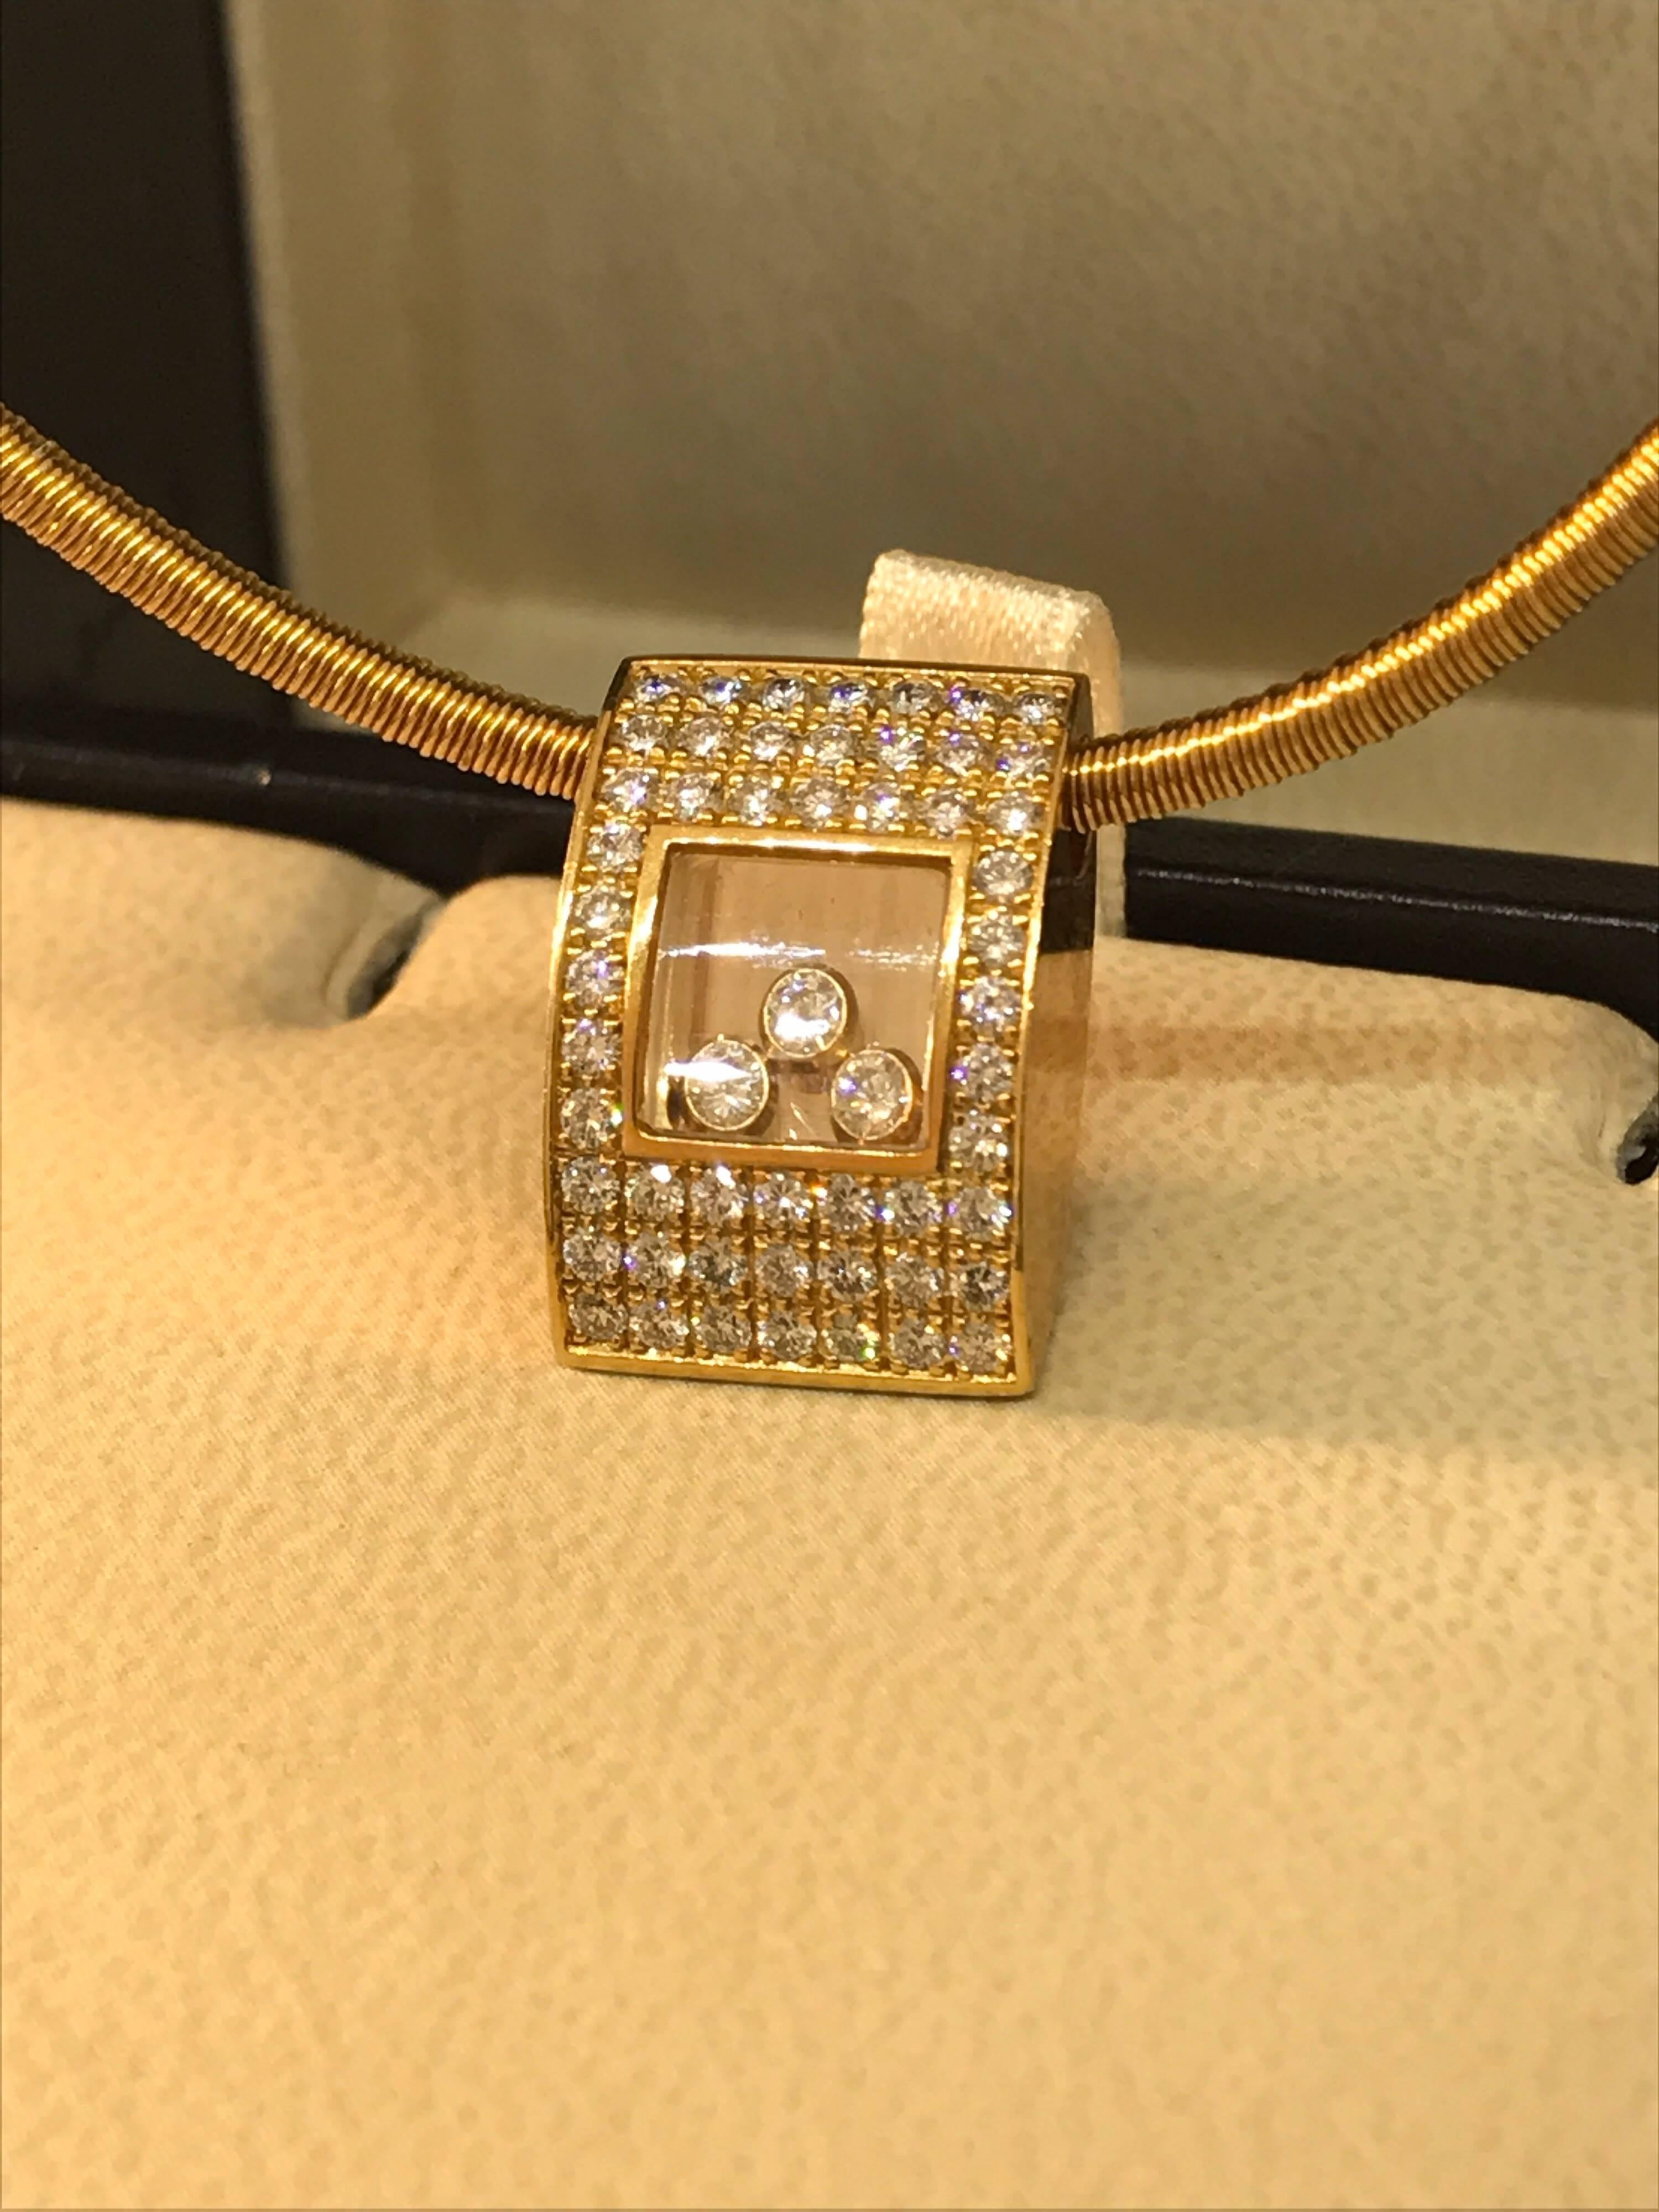 Chopard Happy Diamonds Pendant / Necklace

Model Number: 79/3180-20

100% Authentic

New / Old Stock 

Comes with Chopard box and jewels manual

18 Karat Yellow Gold

52 Diamonds on the pendant (.88 CARATS)

3 Floating Diamonds (.17 Carats)

Retails